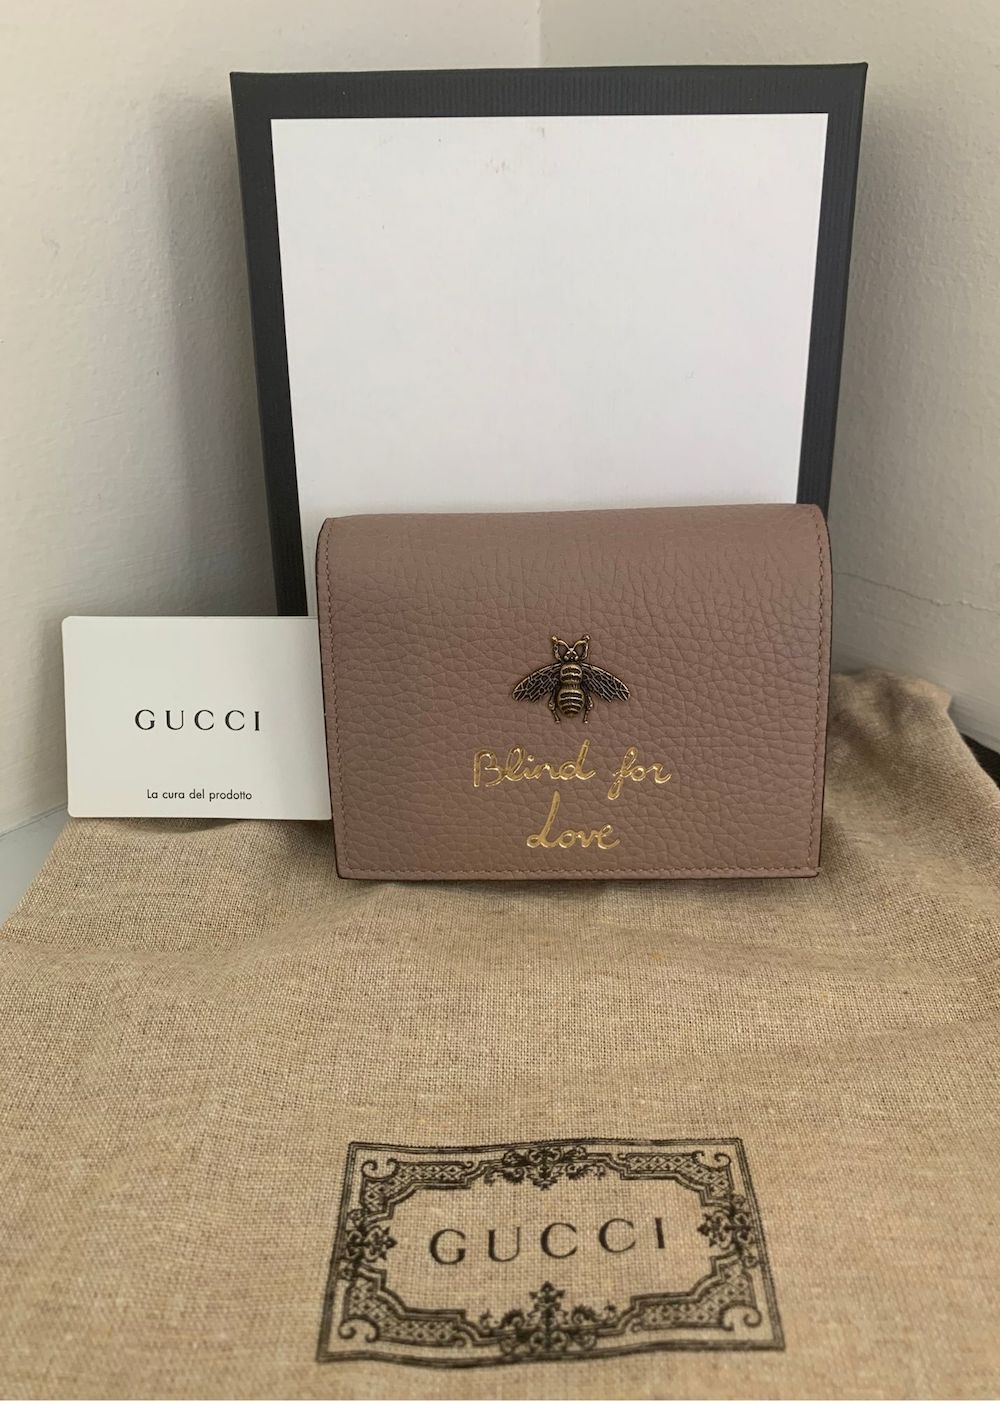 NEW Gucci Cellarius Blind for Love Mini Wallet in Old Rose - J'adore ...